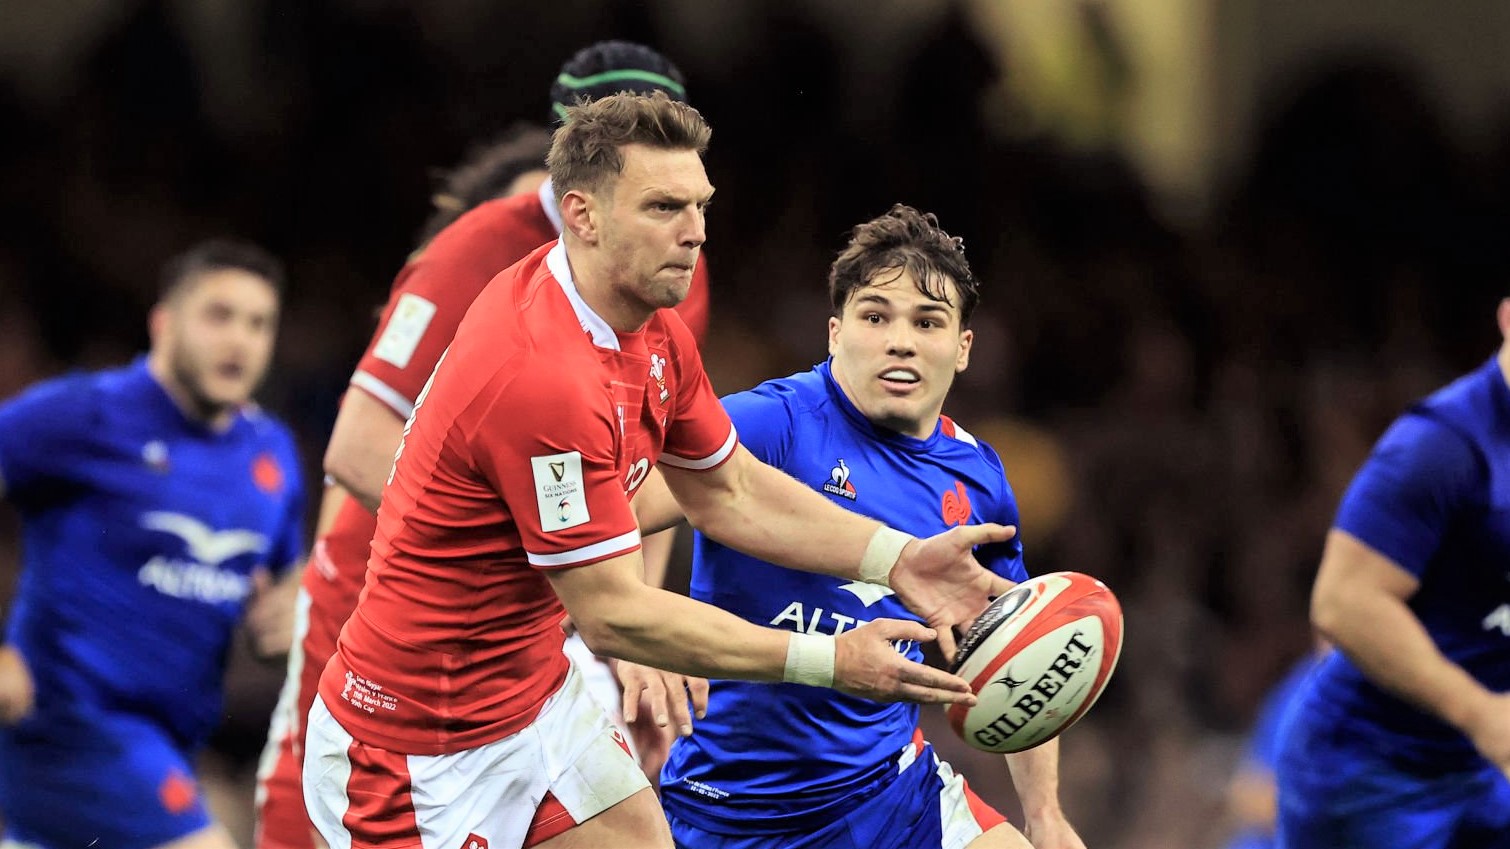 CARDIFF, WALES - MARCH 11: Dan Biggar of Wales is watched by Antoine Dupont of France during the Guinness Six Nations Rugby match between Wales and France at Principality Stadium on March 11, 2022 in Cardiff, Wales. (Photo by David Rogers/Getty Images)